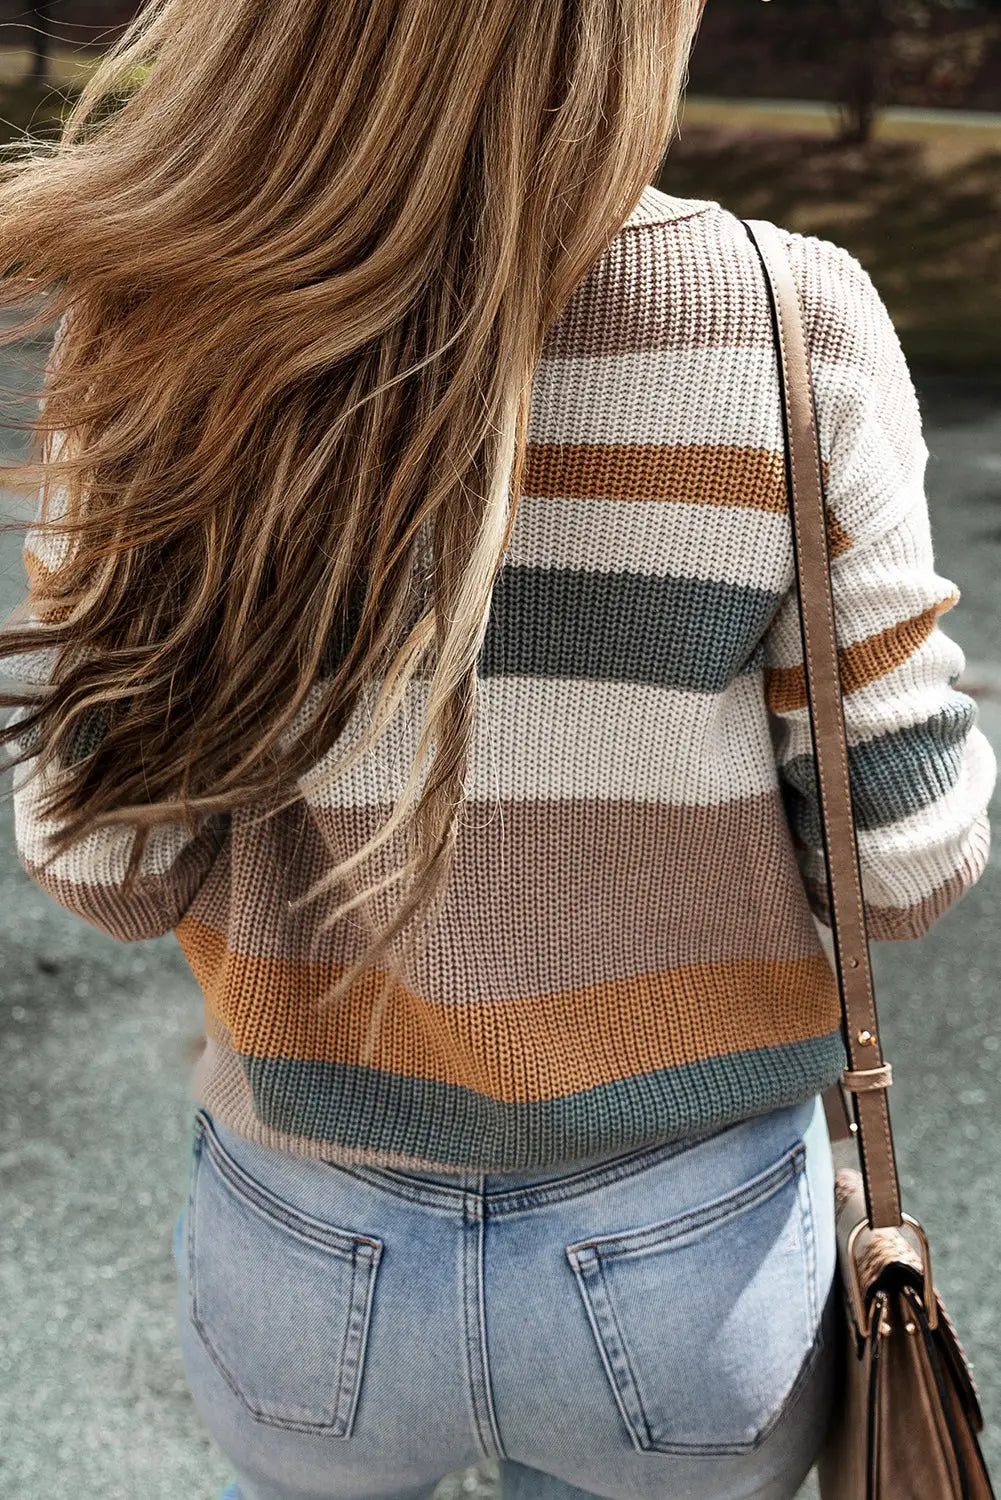 Camel striped knit crew neck t shirt sweater - tops